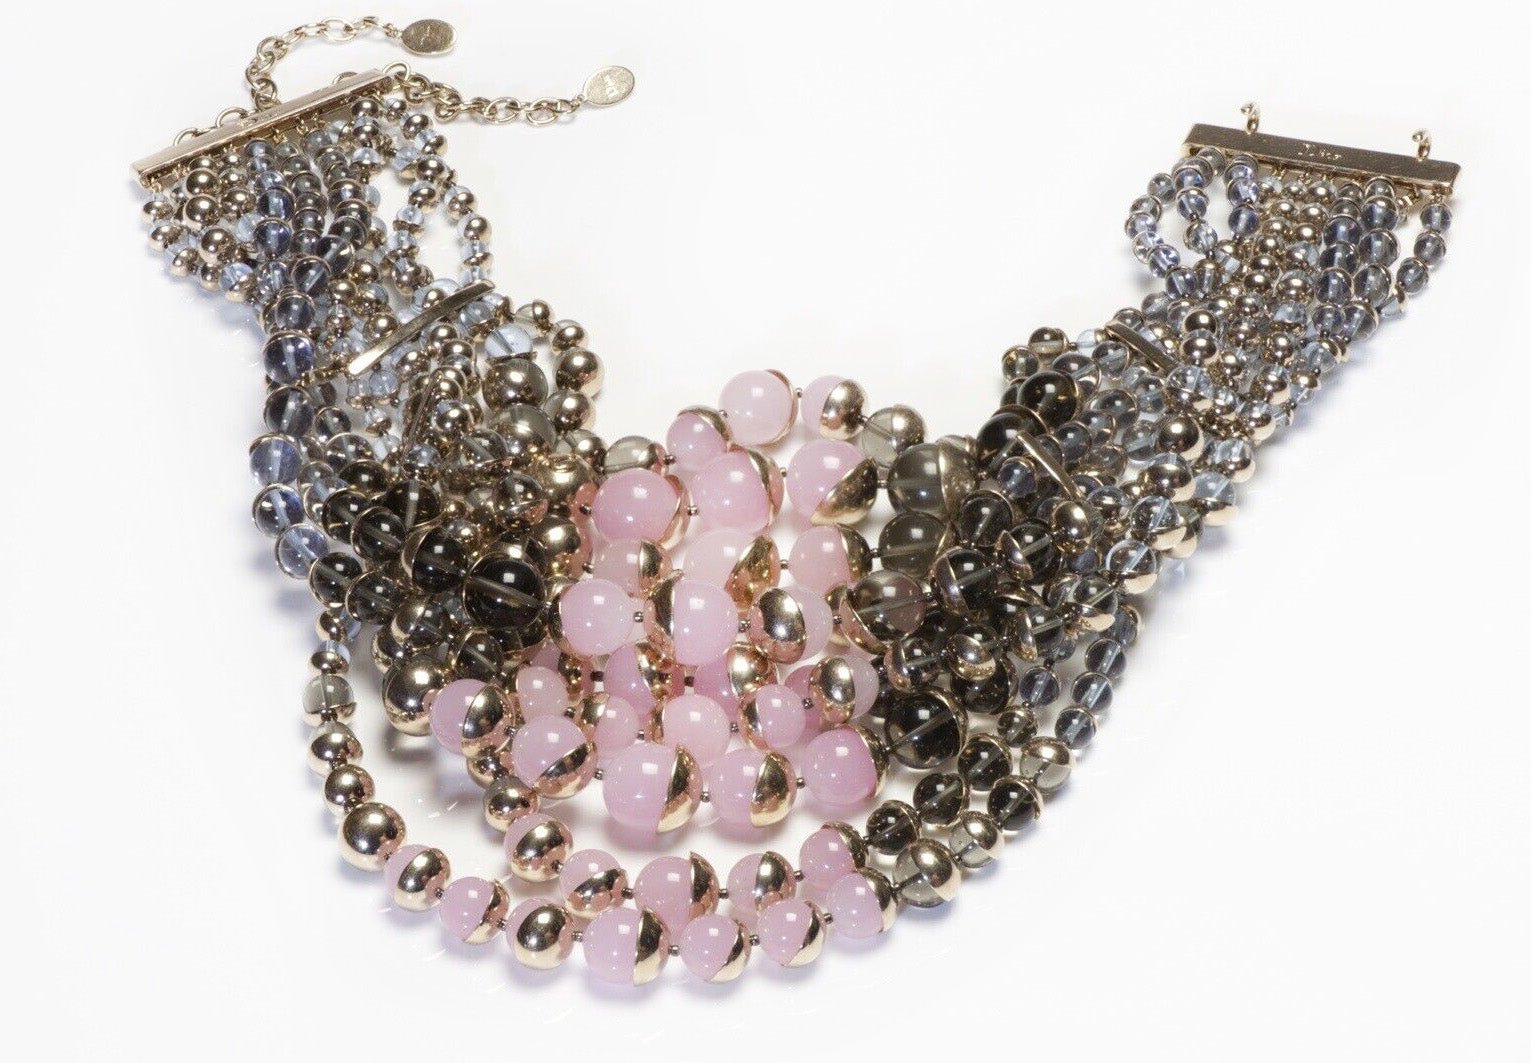 Christian Dior Pink Gray Glass Beads Mise En Dior Tribale Masai Choker Necklace - DSF Antique Jewelry